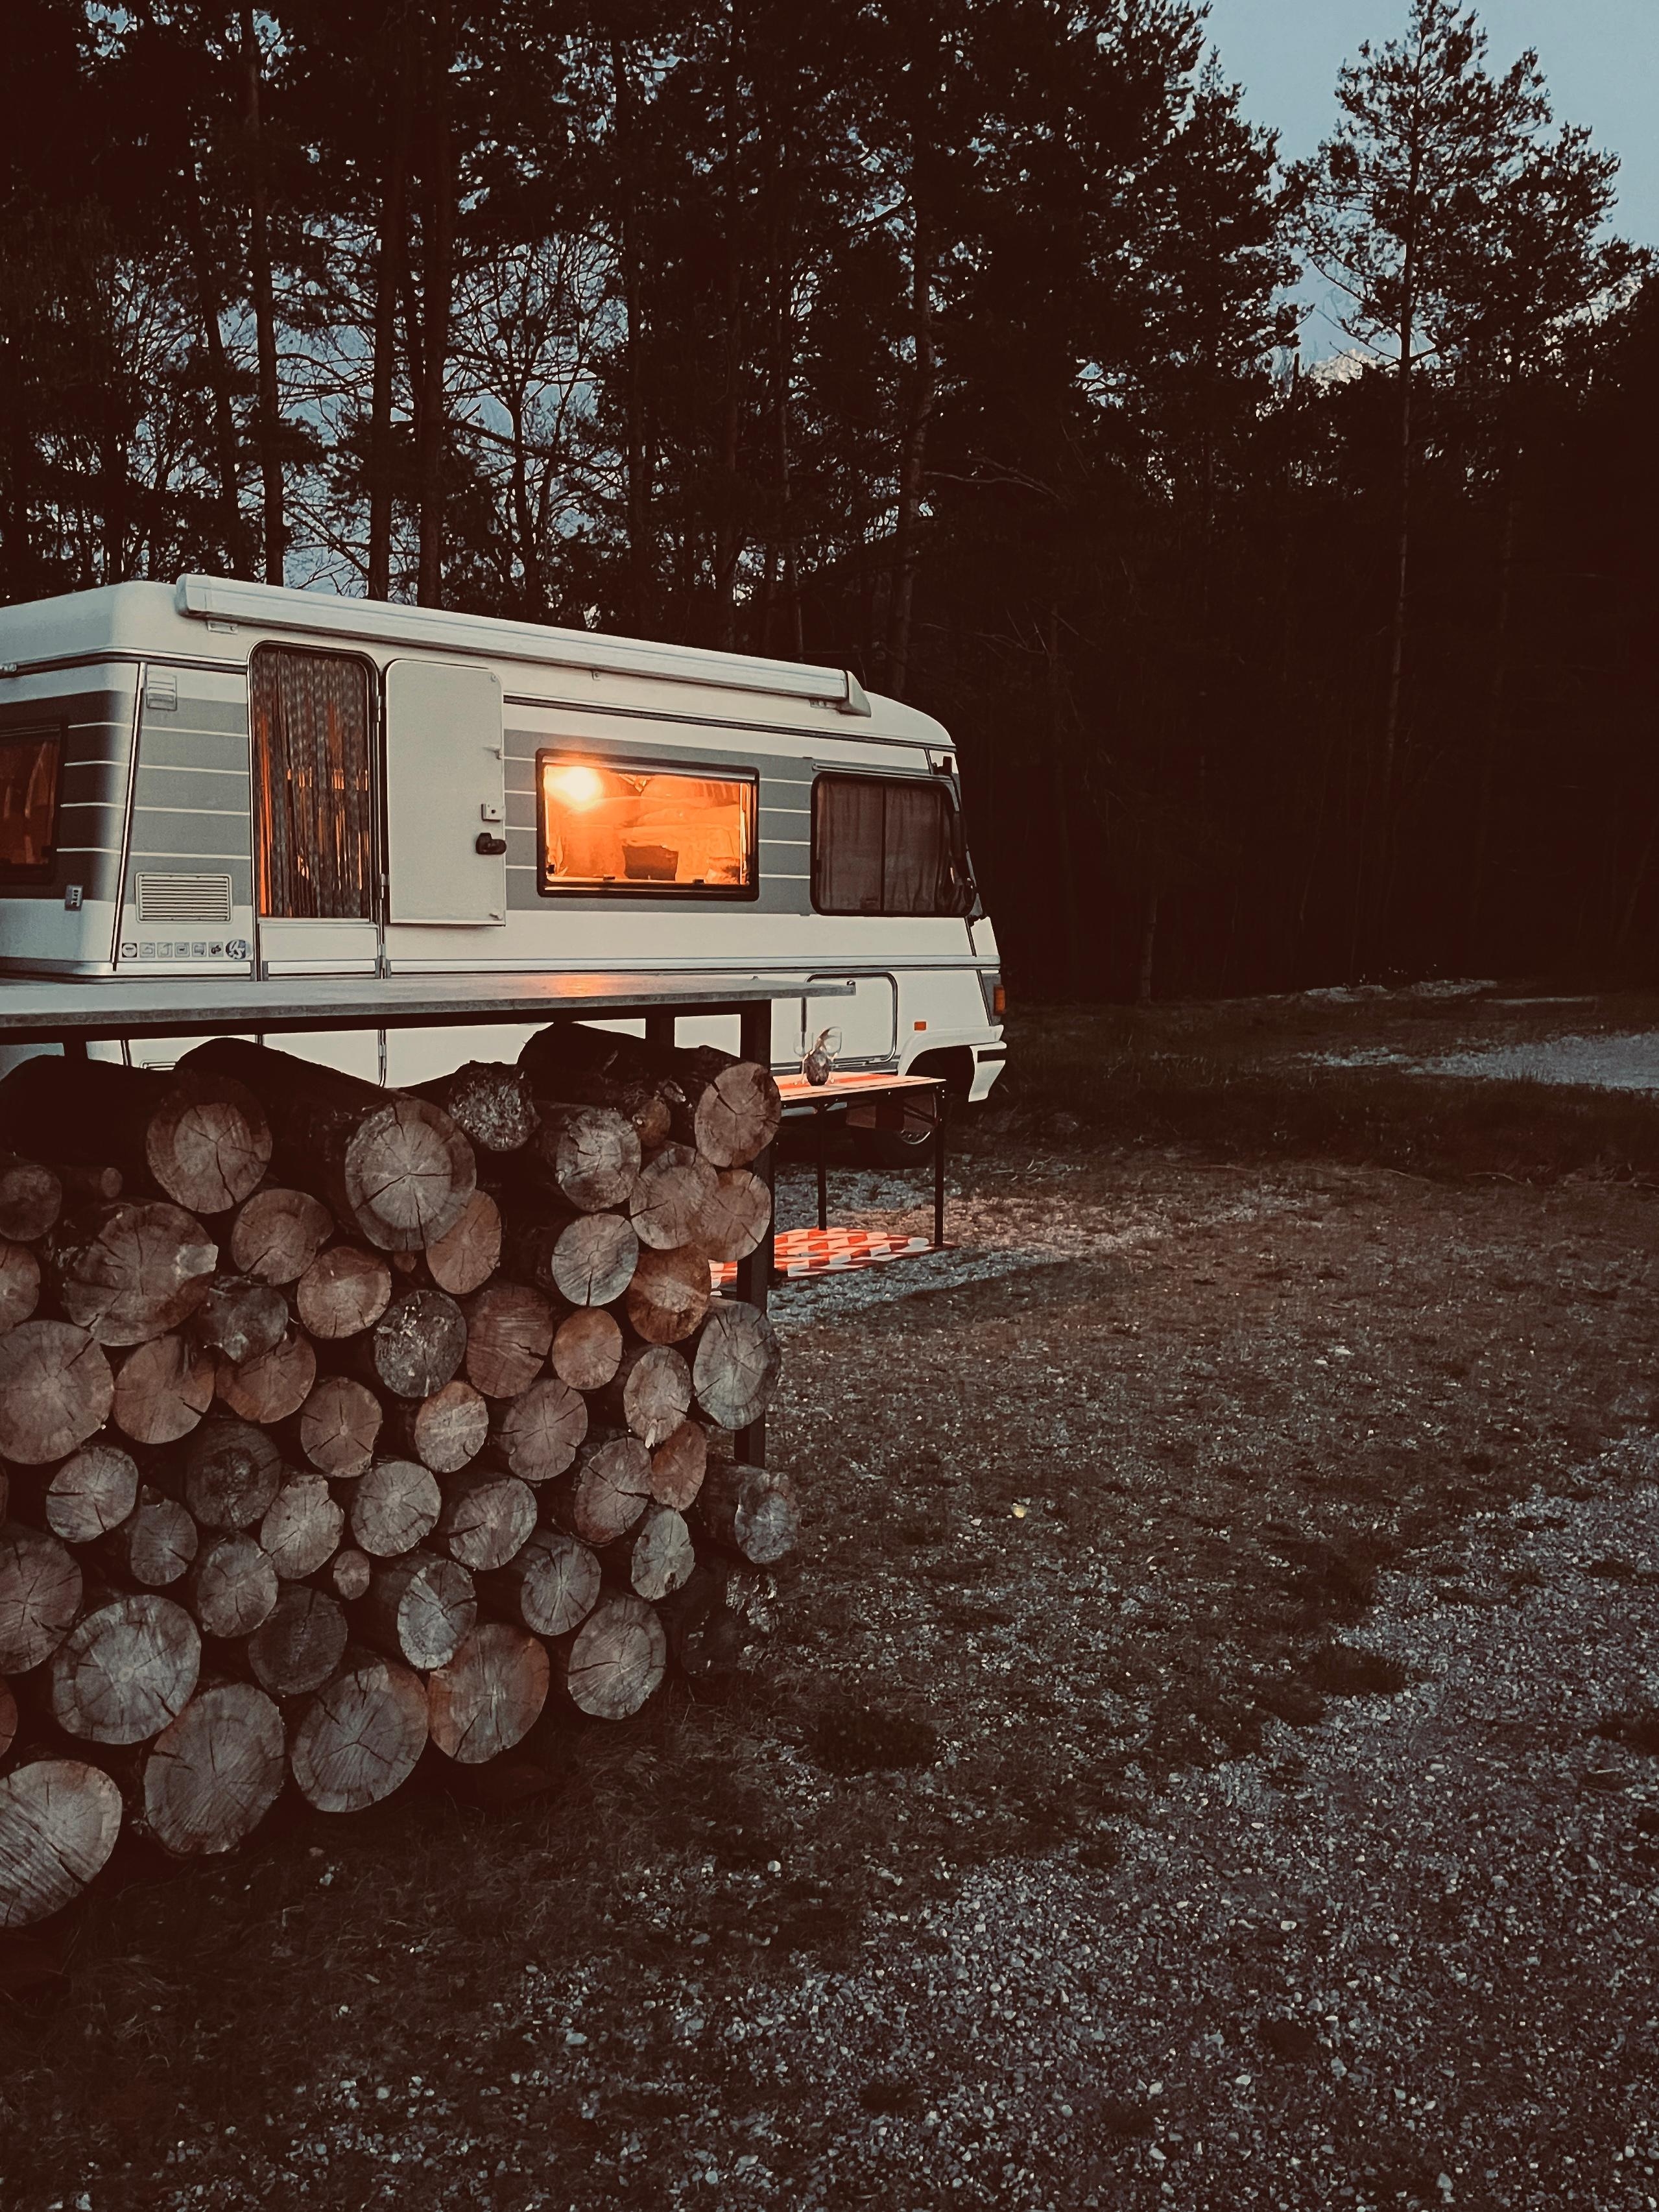 slow travelling 🏕️
#hymermobil#vanlife#slowtrevelling#mountains#camping#midcentury#woods#motorhome#nevernottrevelling